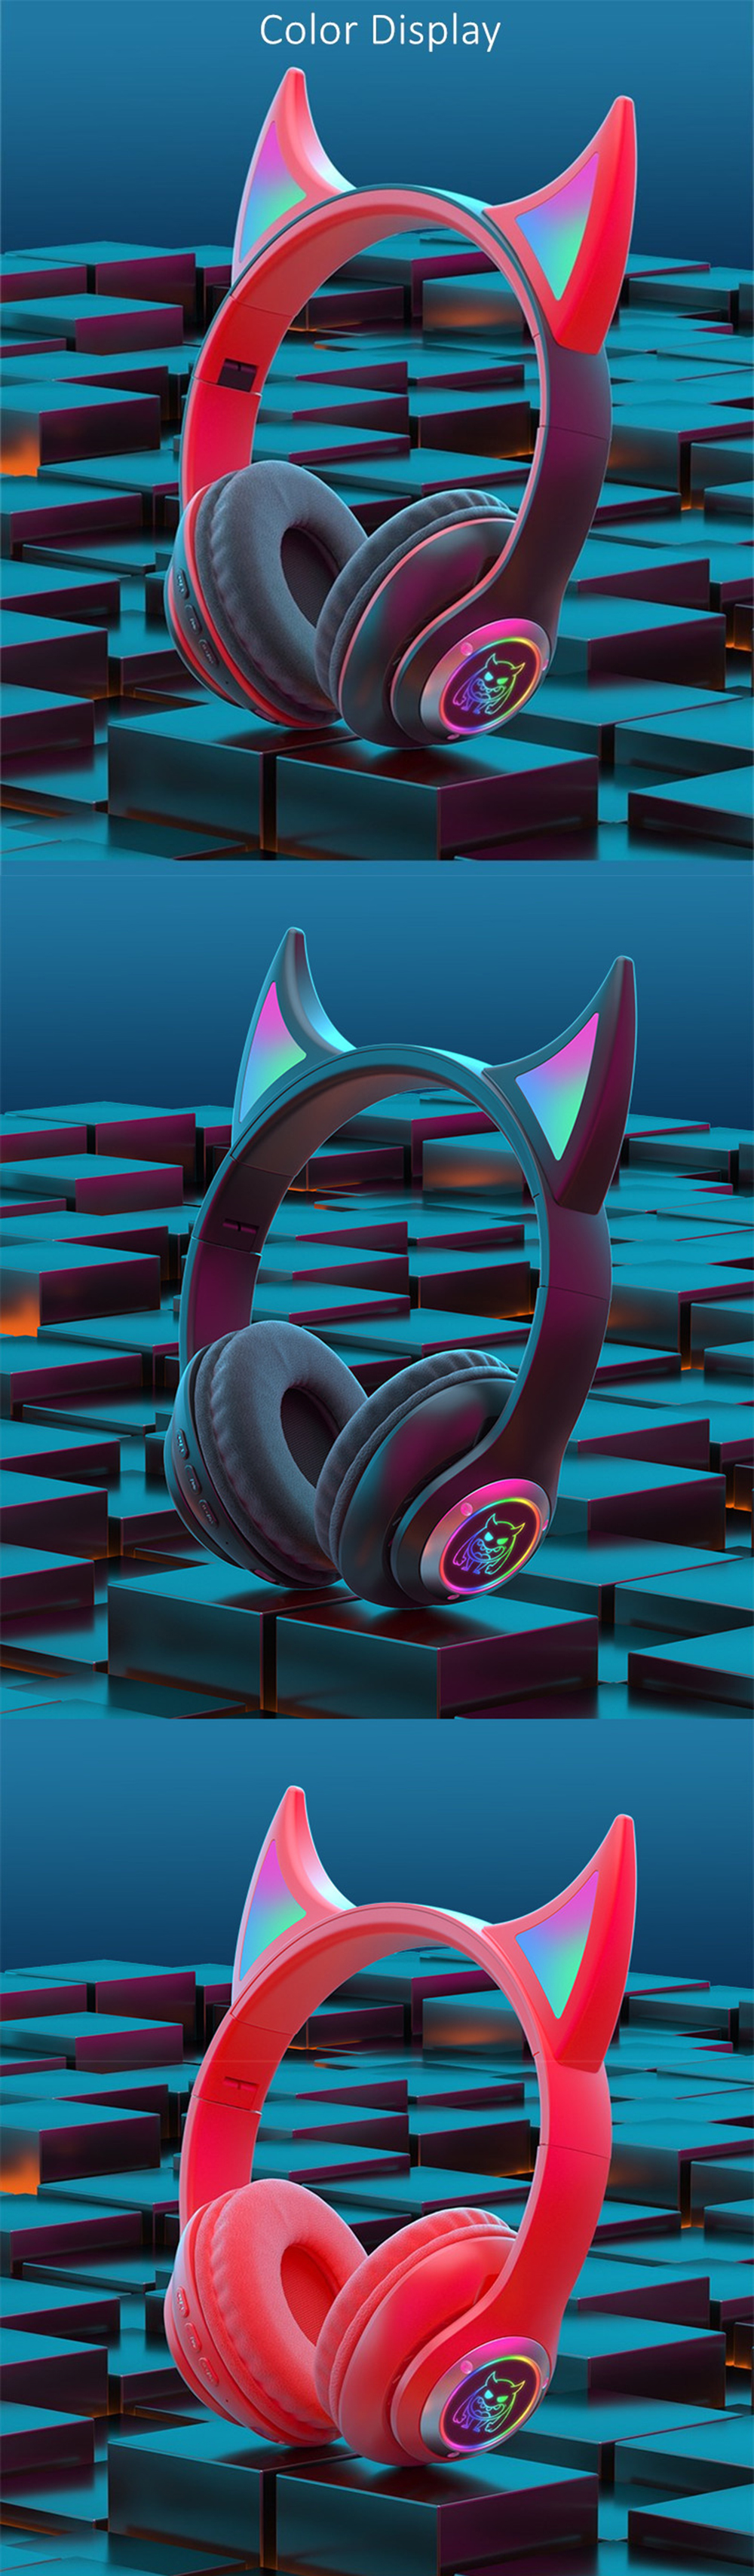 CR-STN-29-Devils-Horn-Headset-Wireless-BT50-HIFI-Stereo-Sound-IPX5-Noise-Canceling-Colorful-RGB-Back-1918949-12